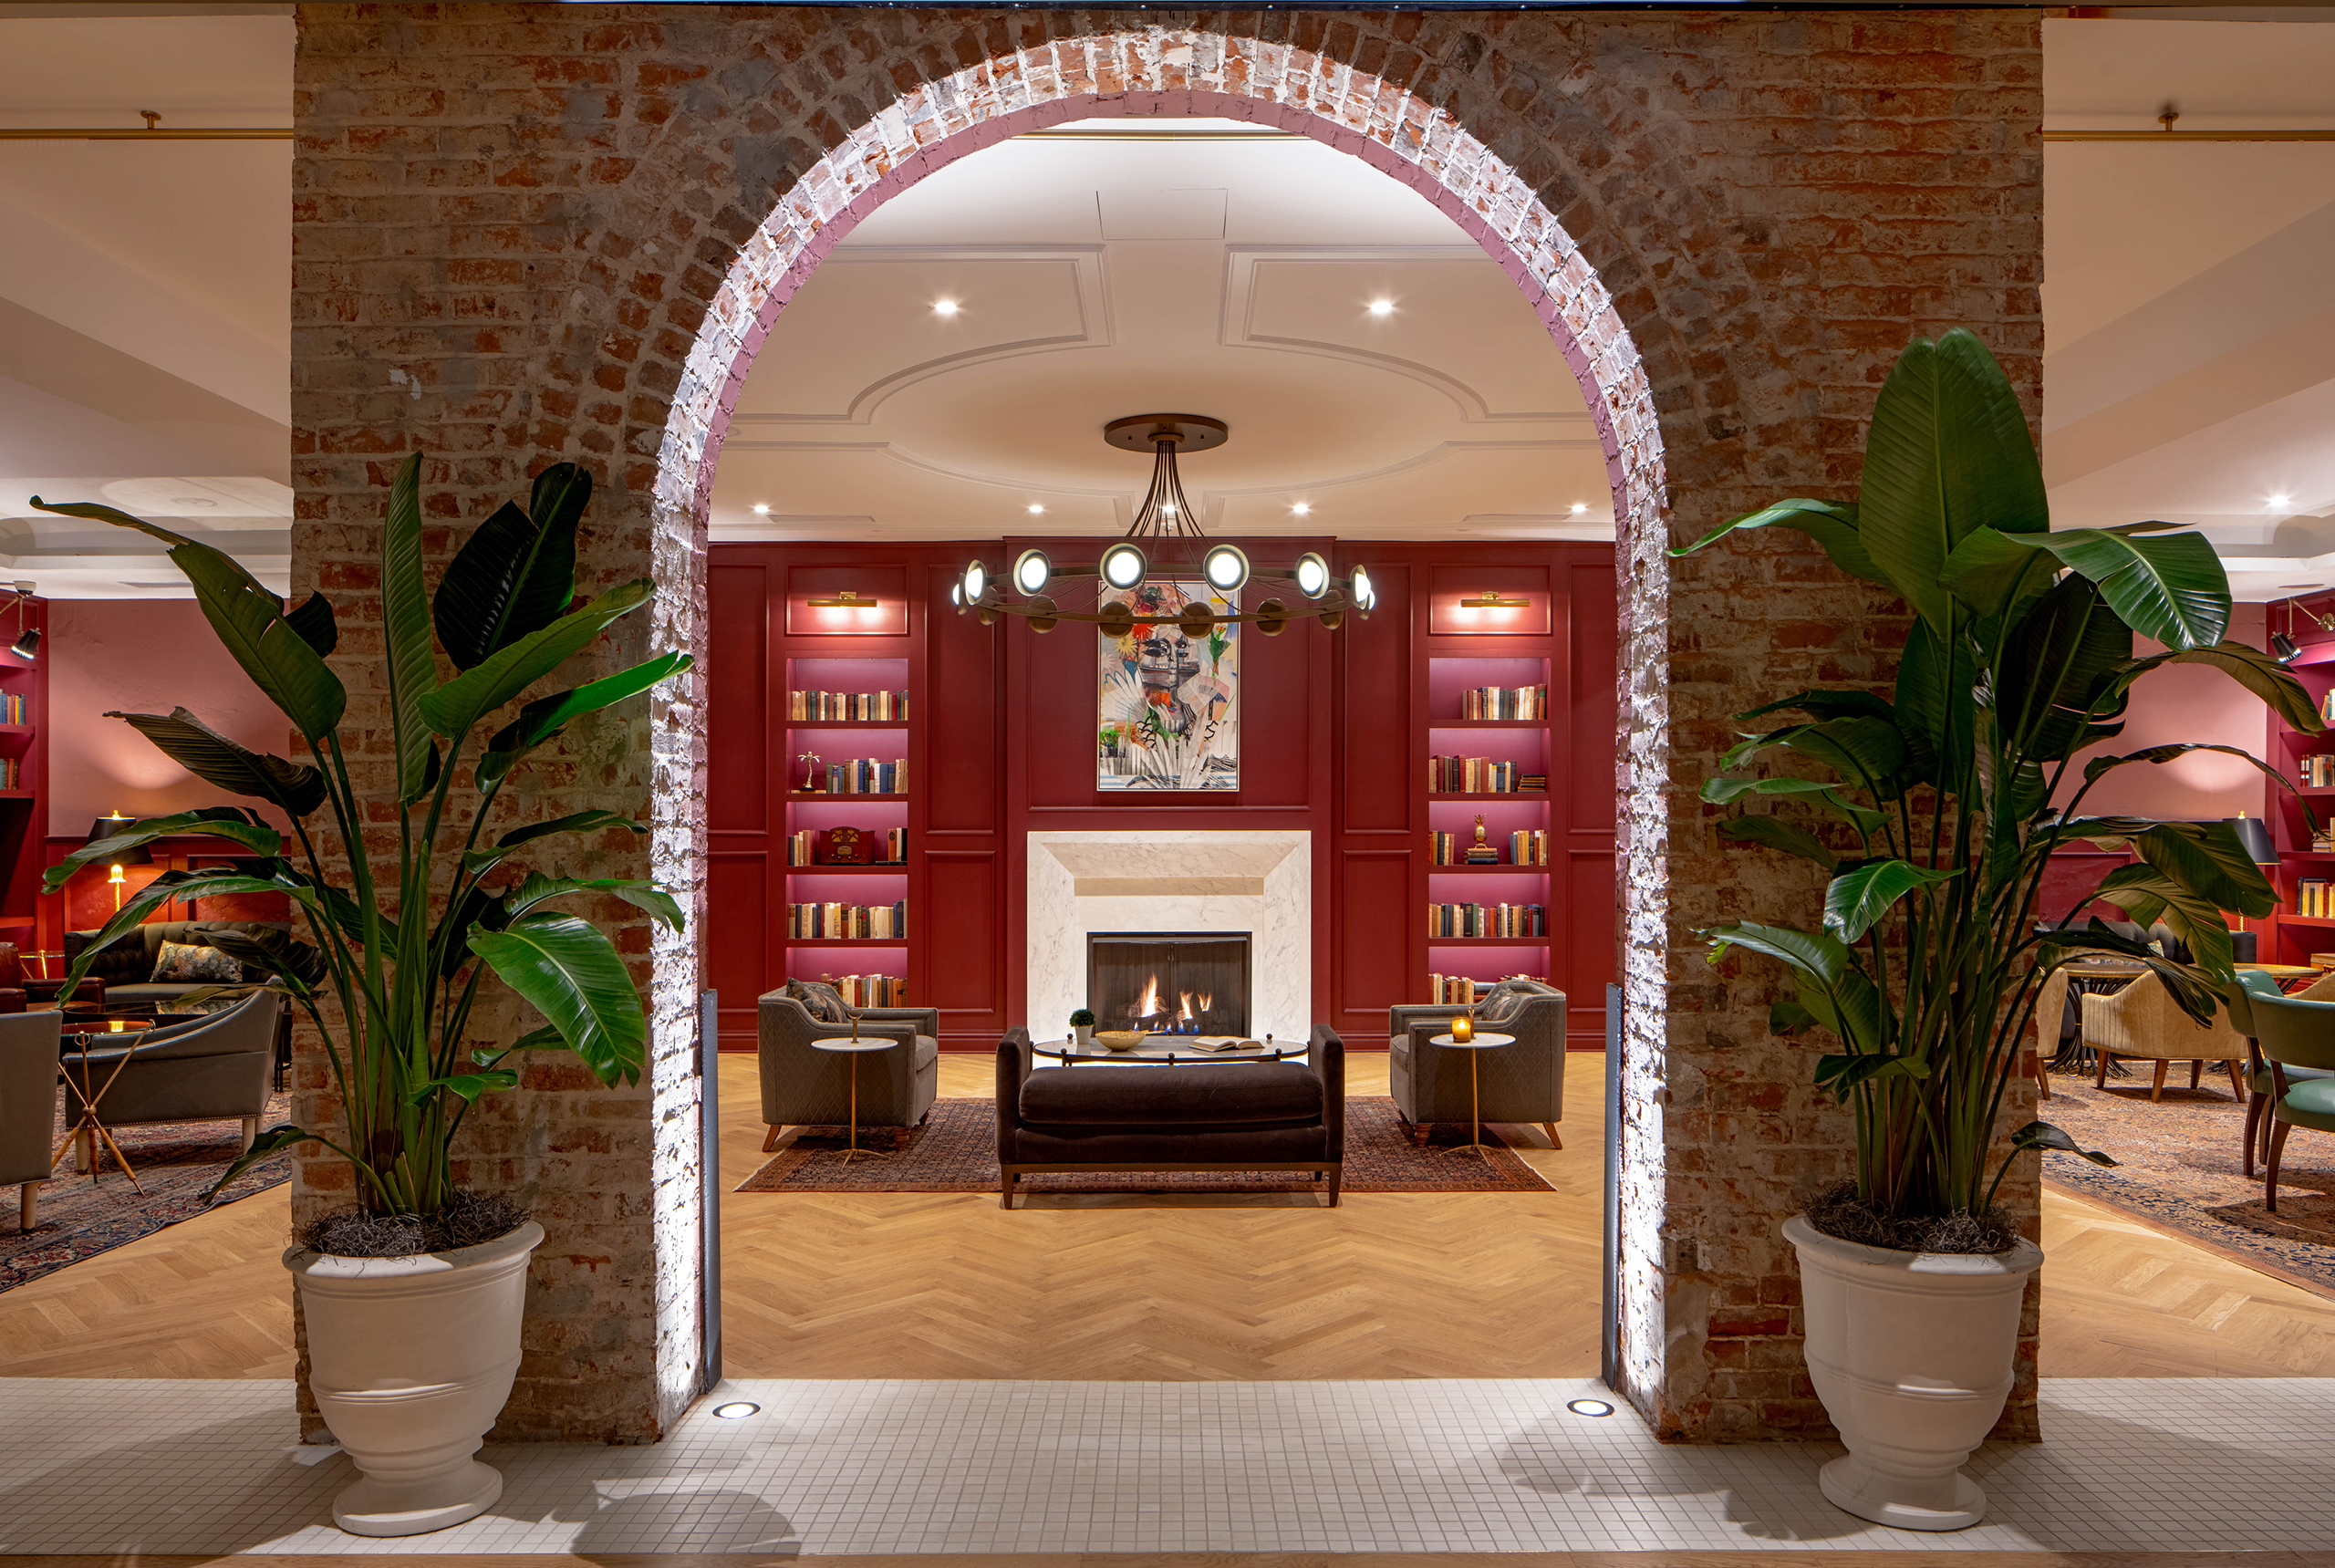 The exposed brick archway inside The Eliza Jane Hotel in New Orleans